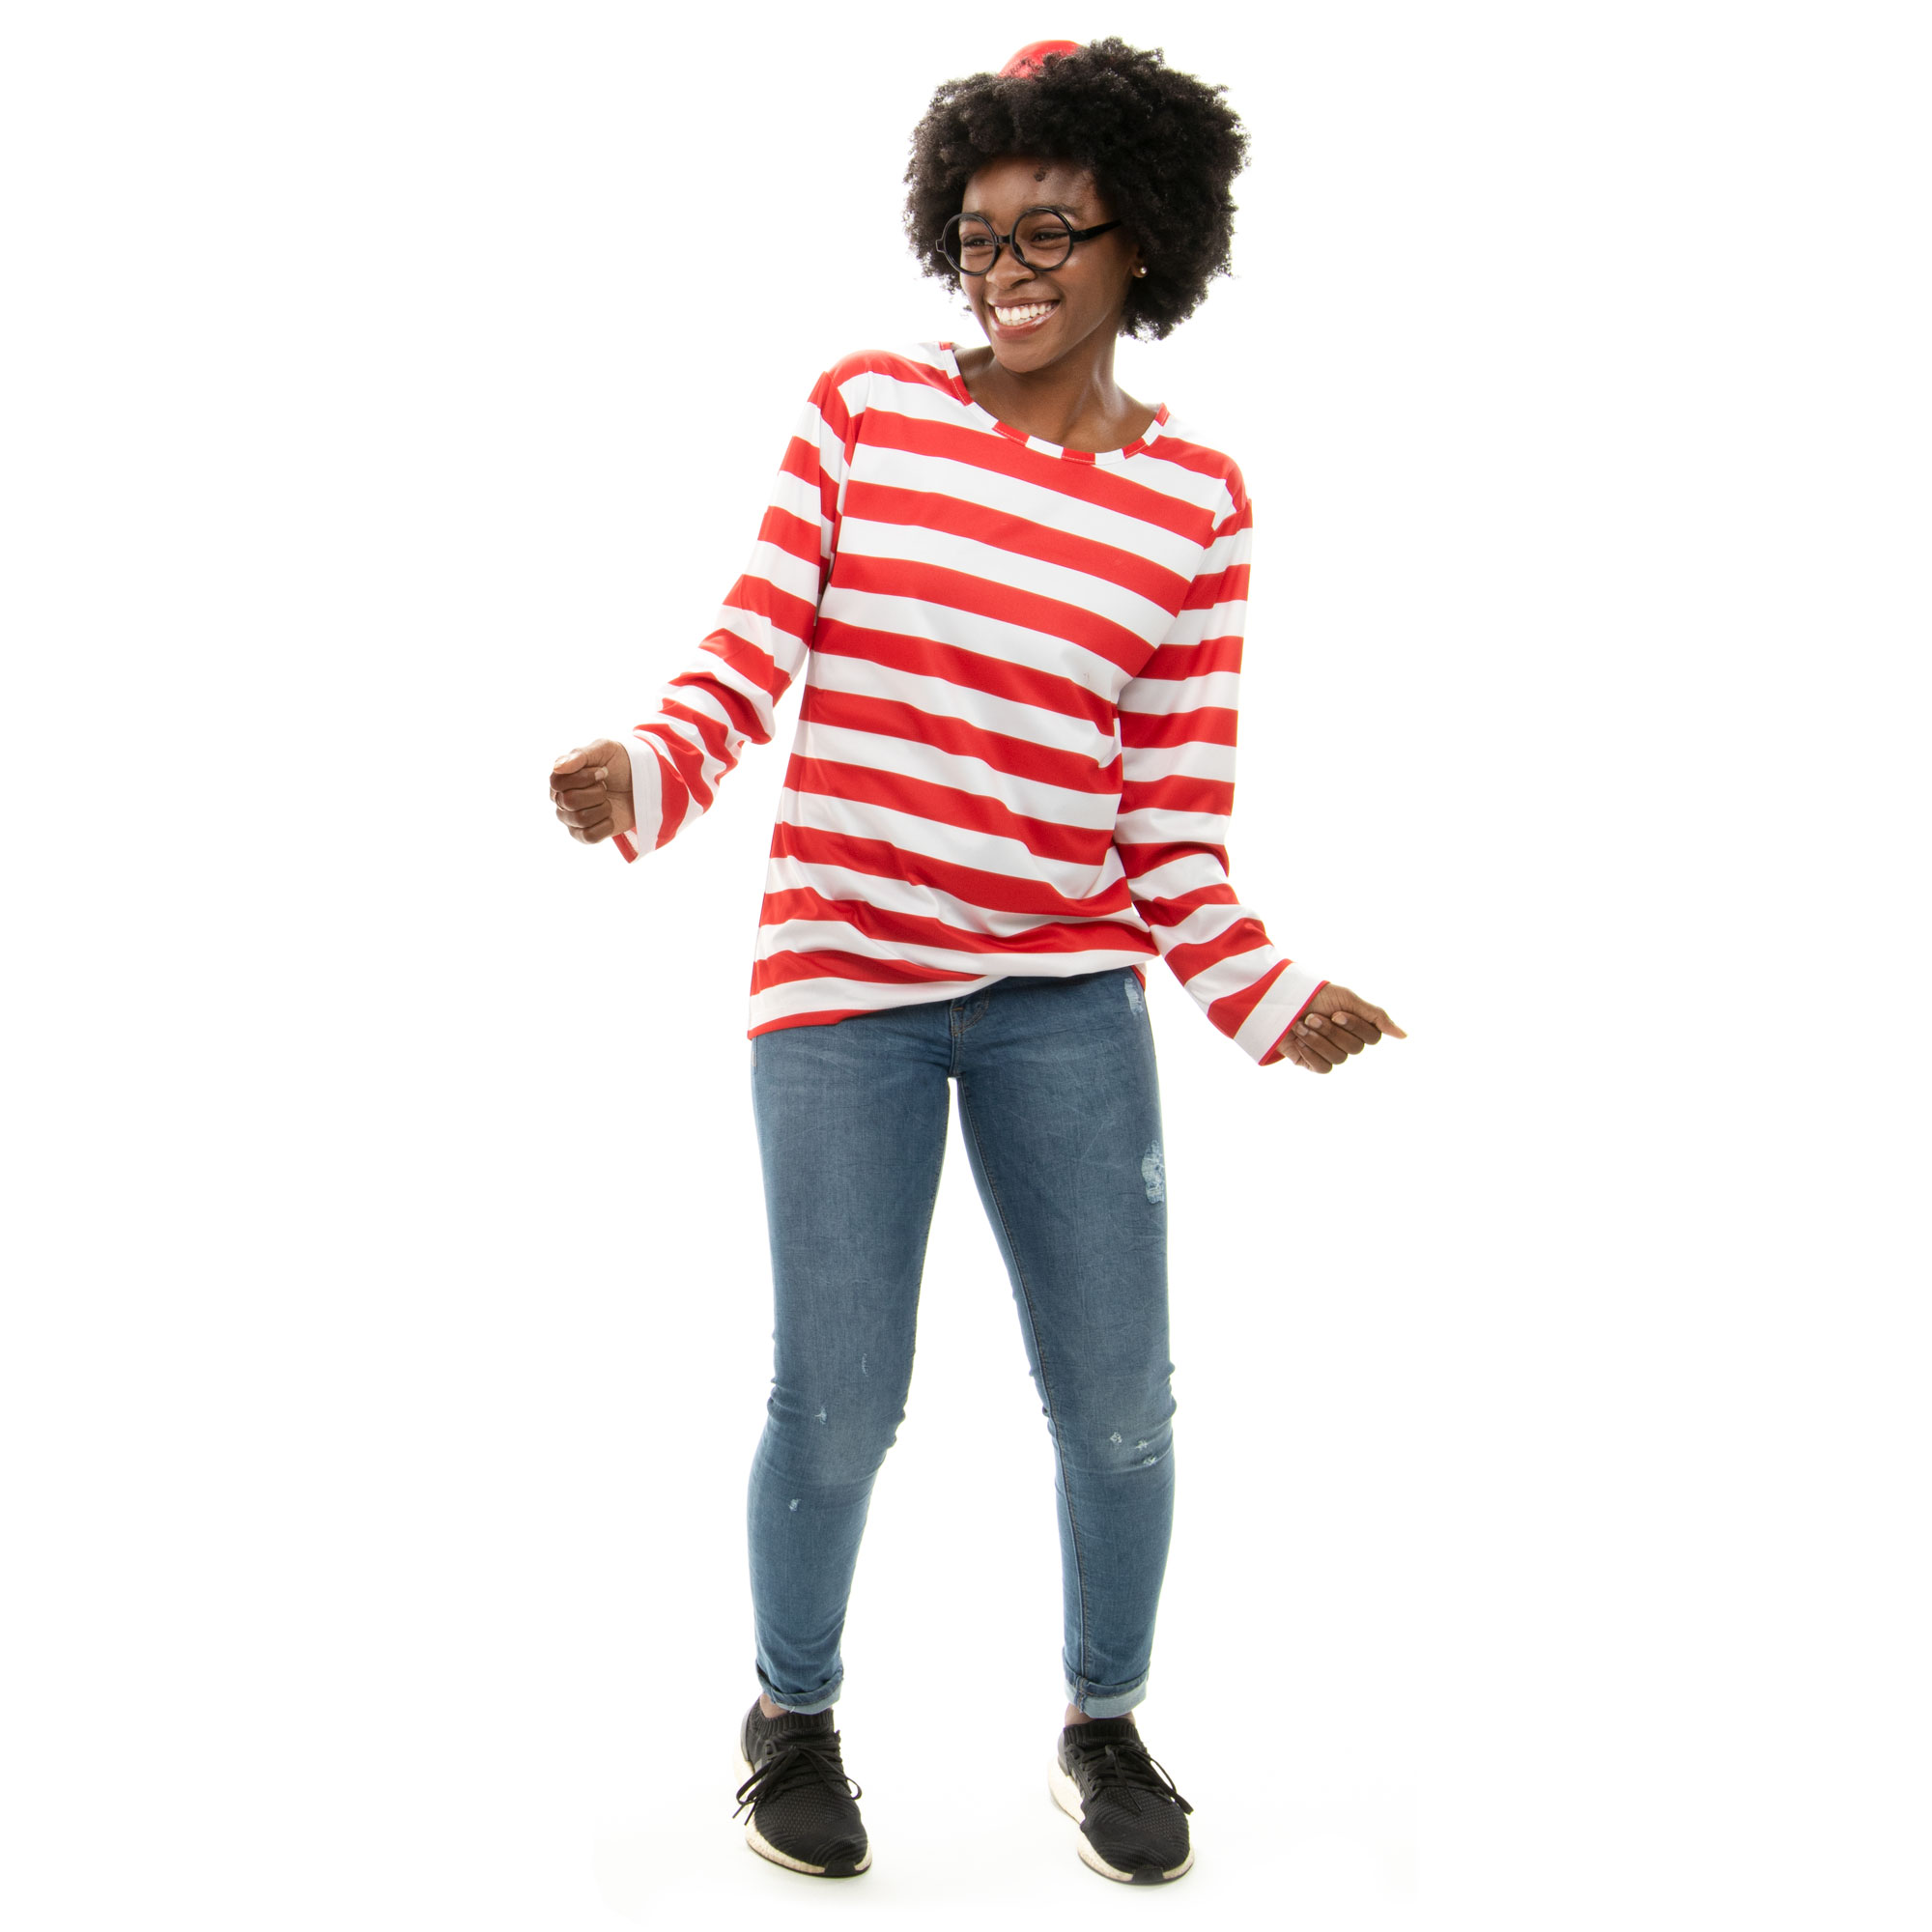 Where's Wally Halloween Costume - Women's Cosplay Outfit, L